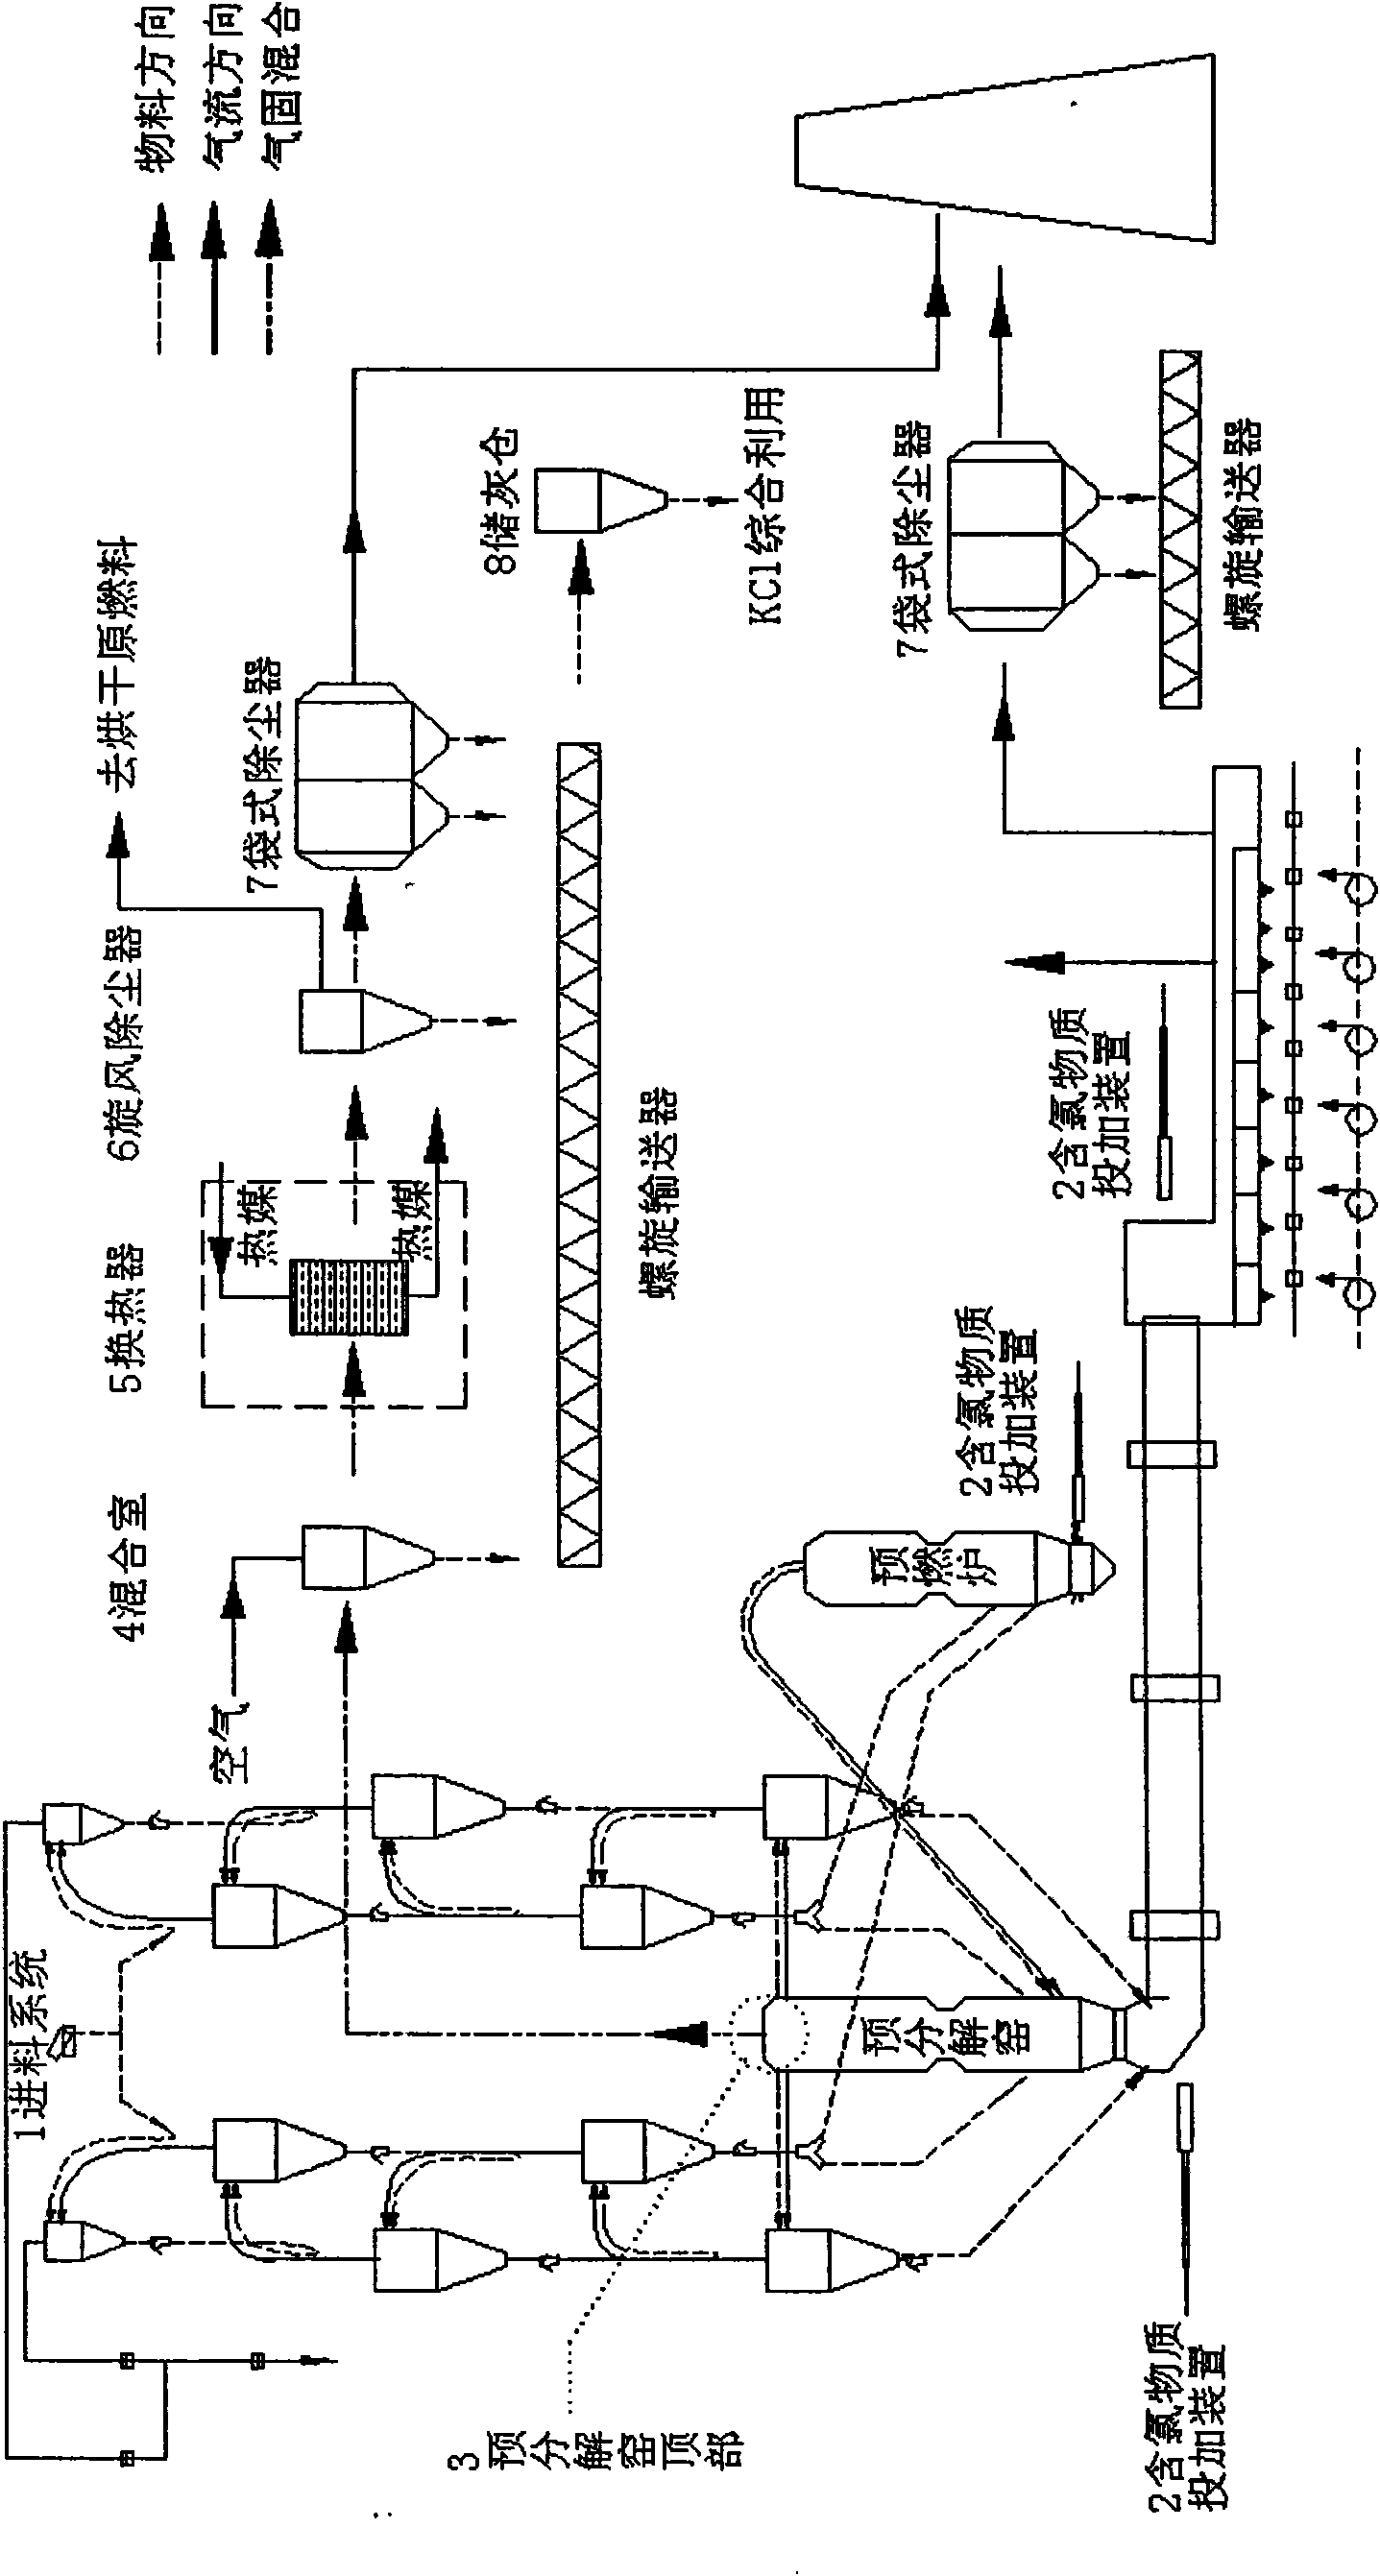 Method for producing low alkali cement by using high alkali raw materials